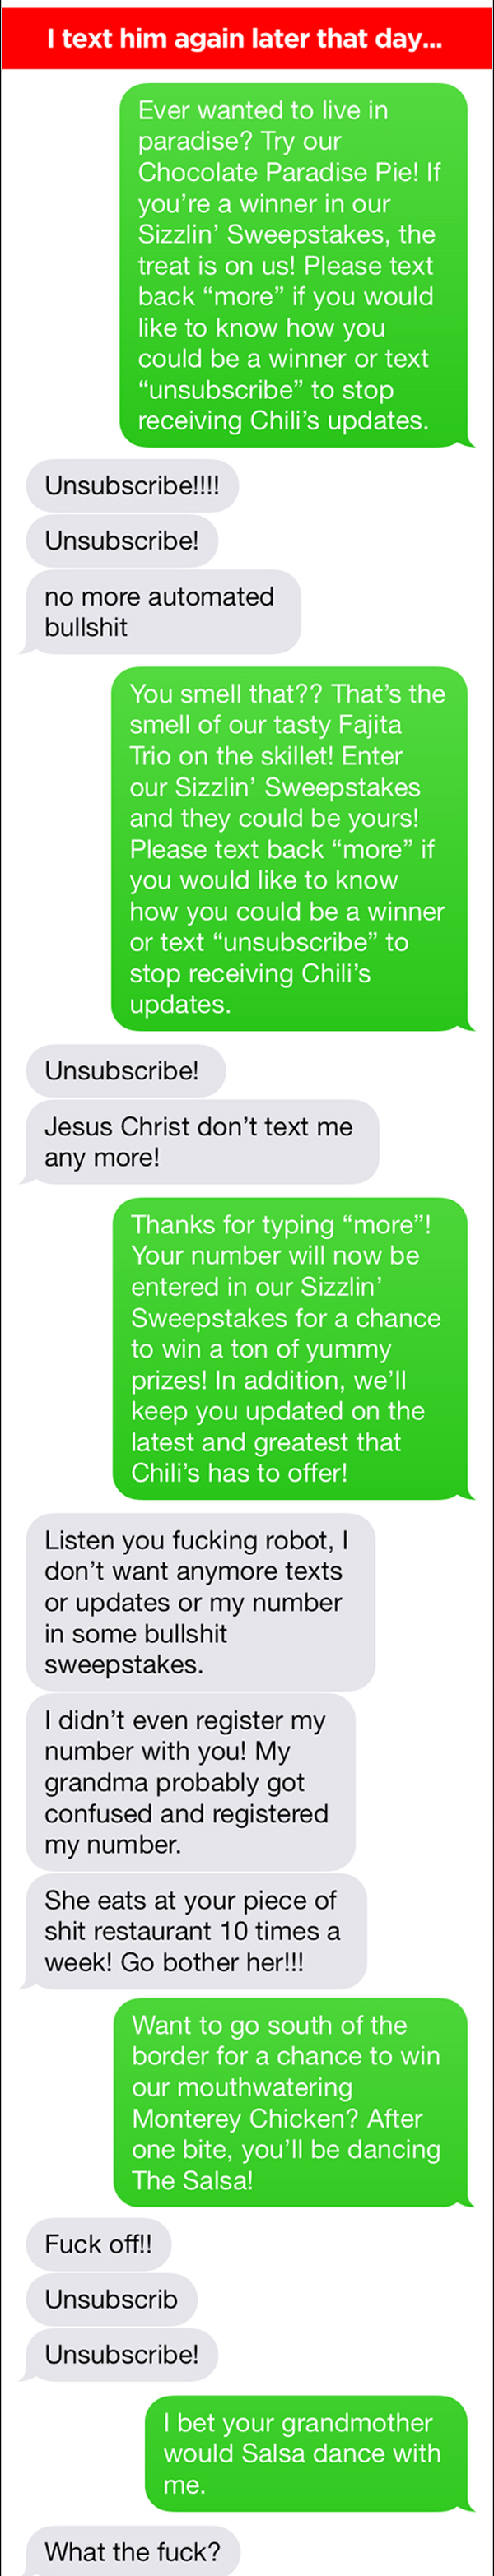 chili's text trolling